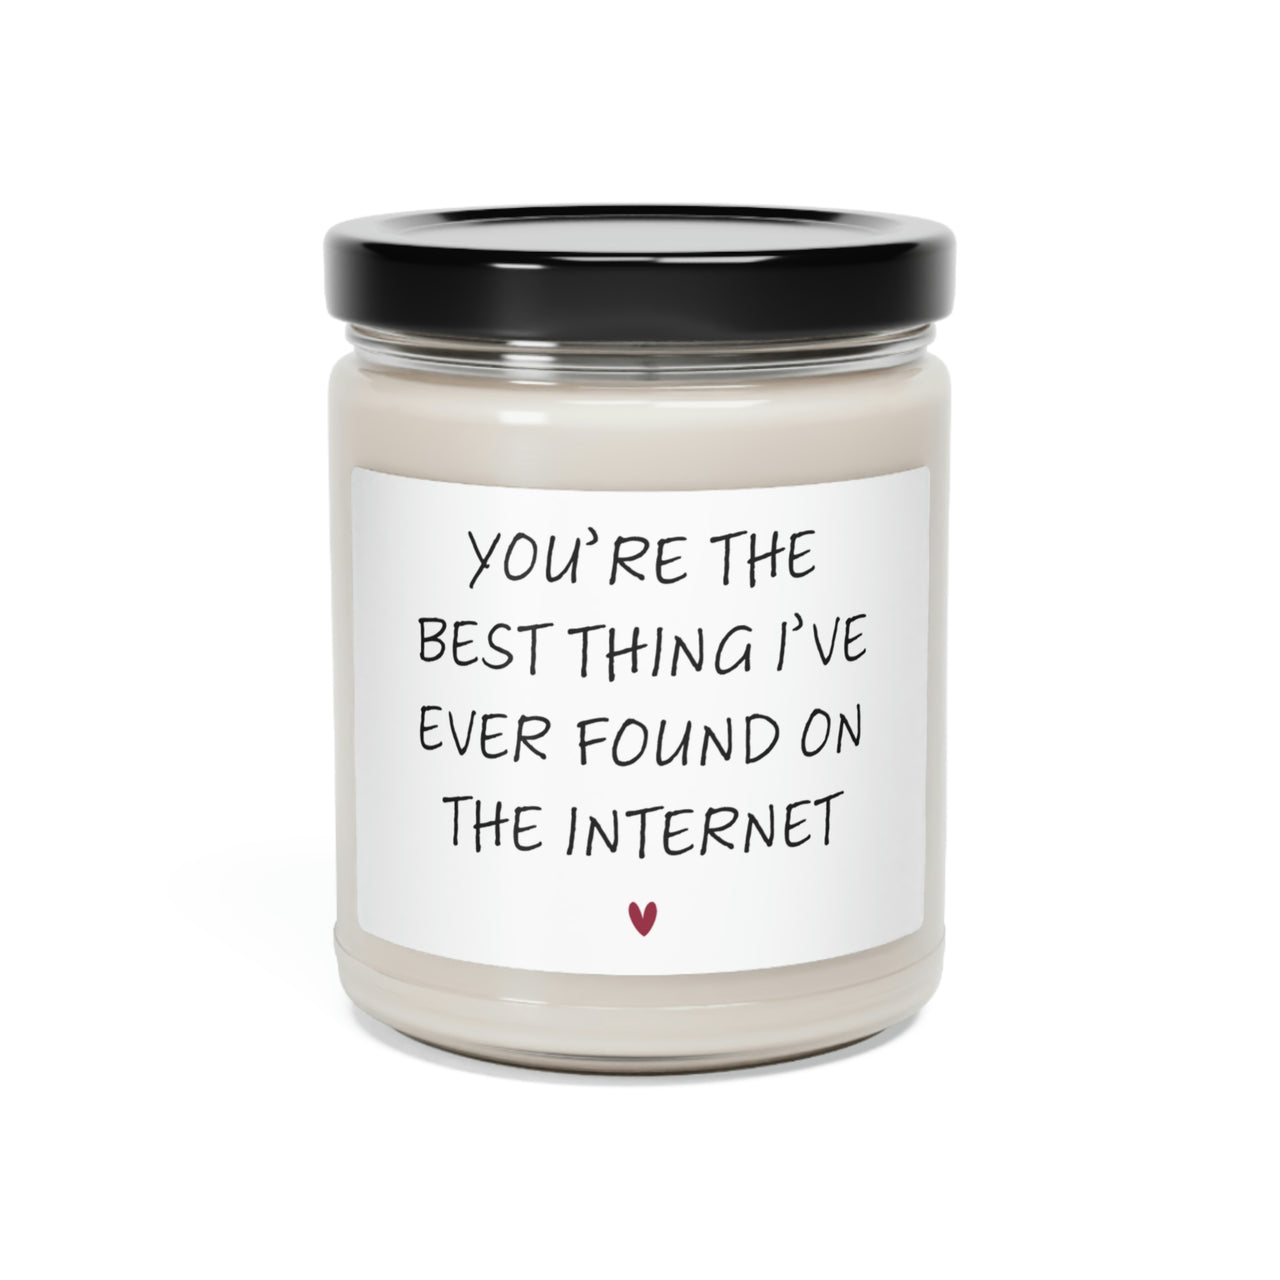 You're the Best Thing I've Ever Found on the Internet Candle